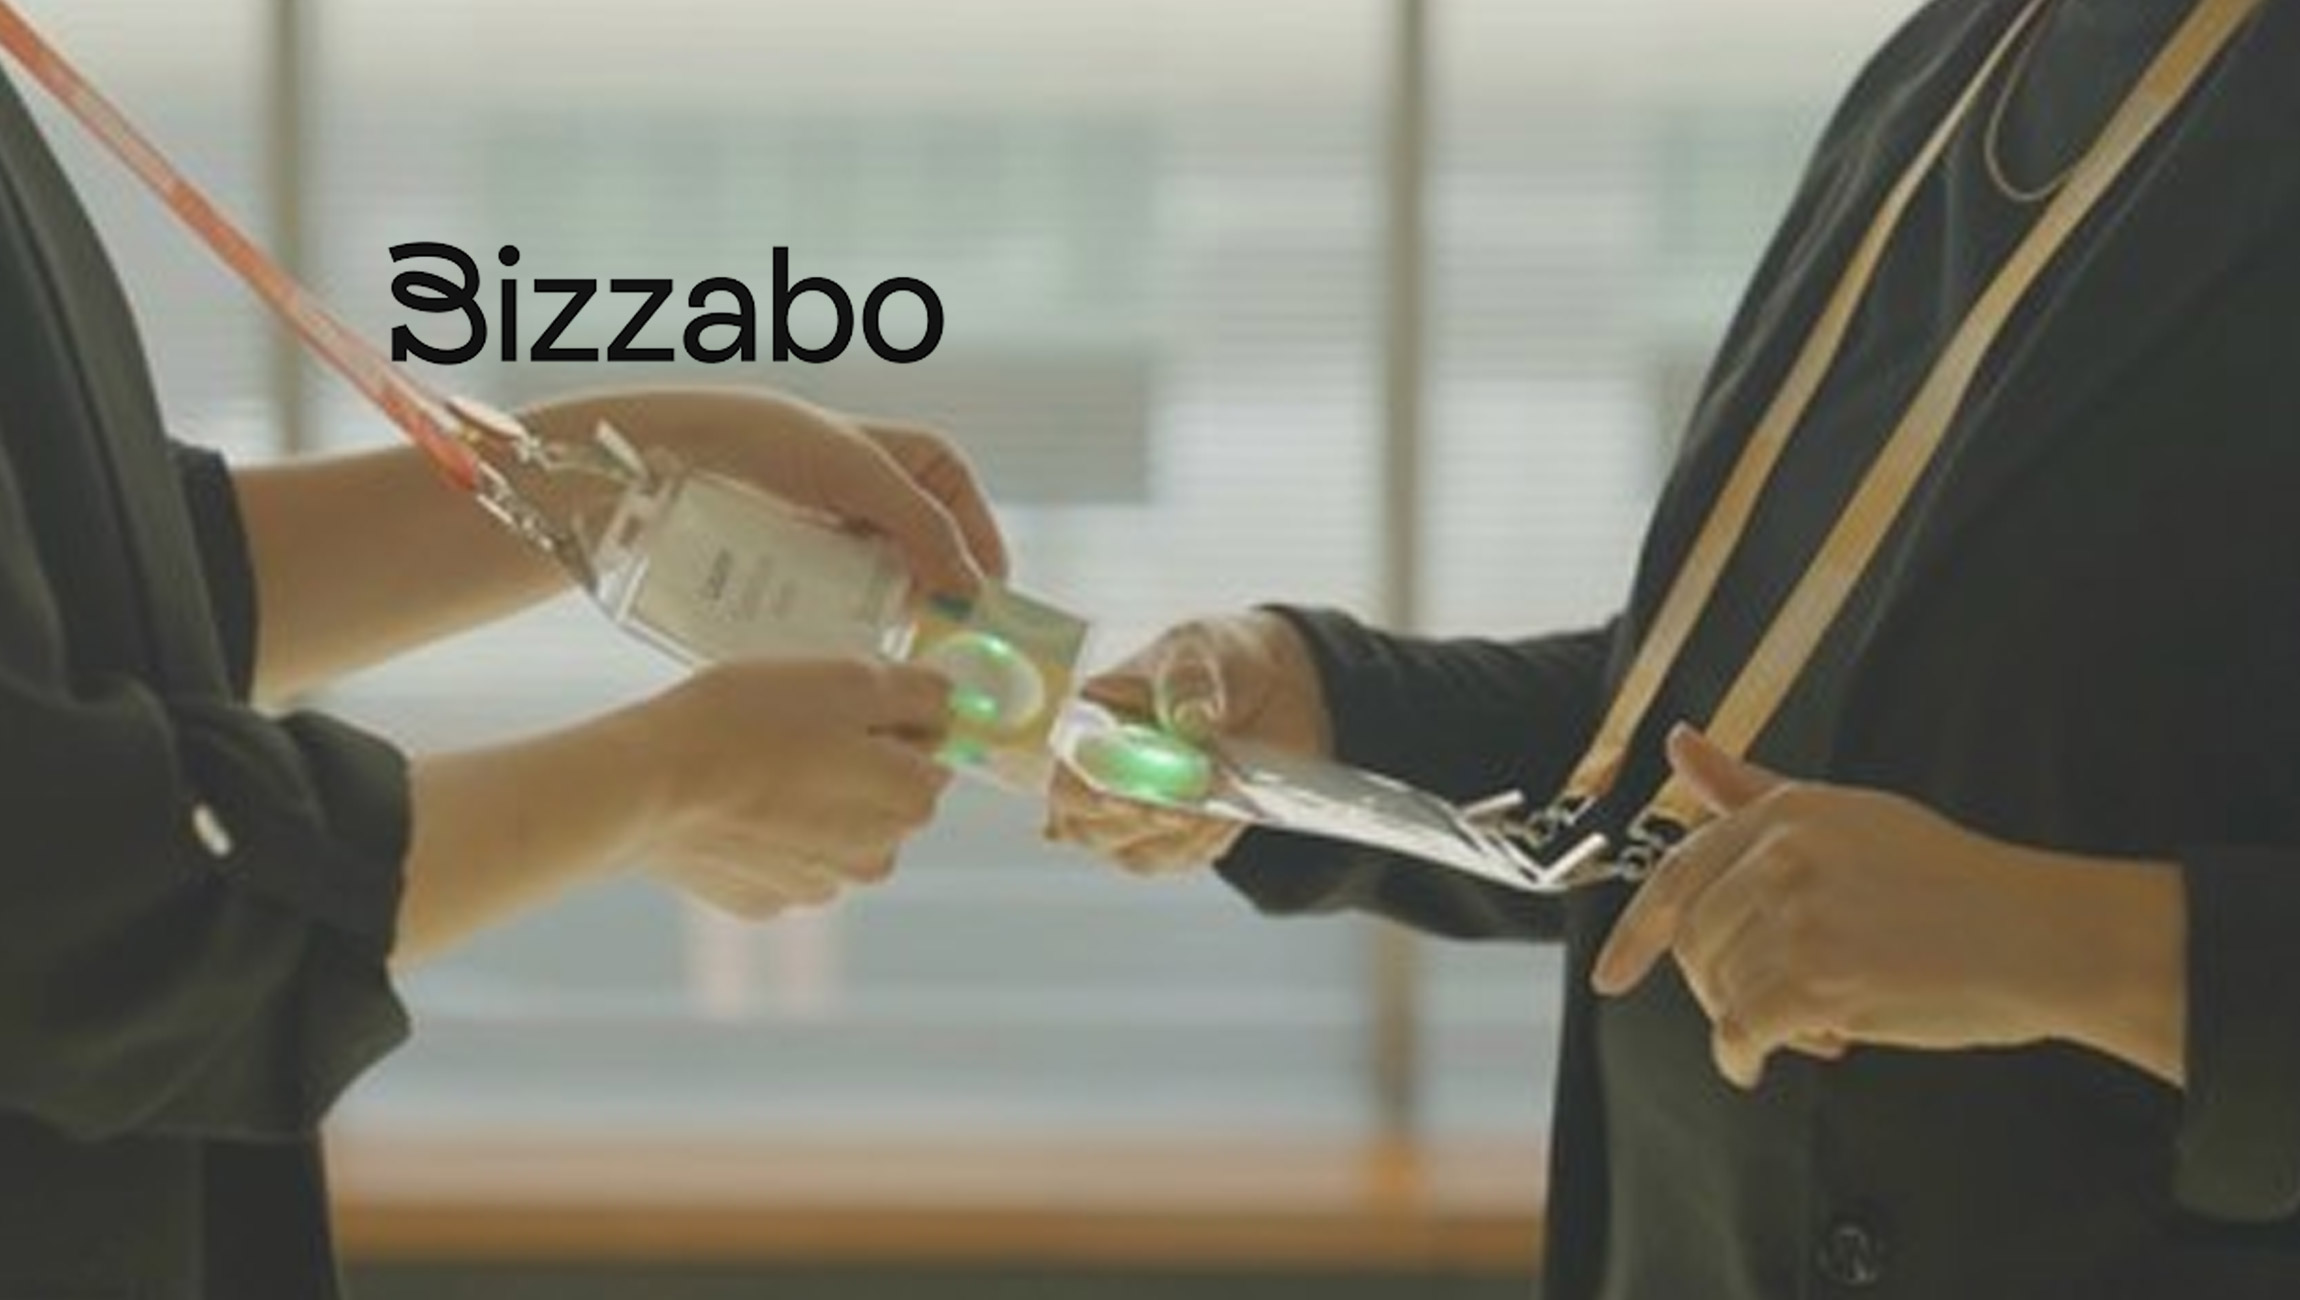 Bizzabo Launches Klik Experiential Wearable Onsite Technology for Flagship Events 1